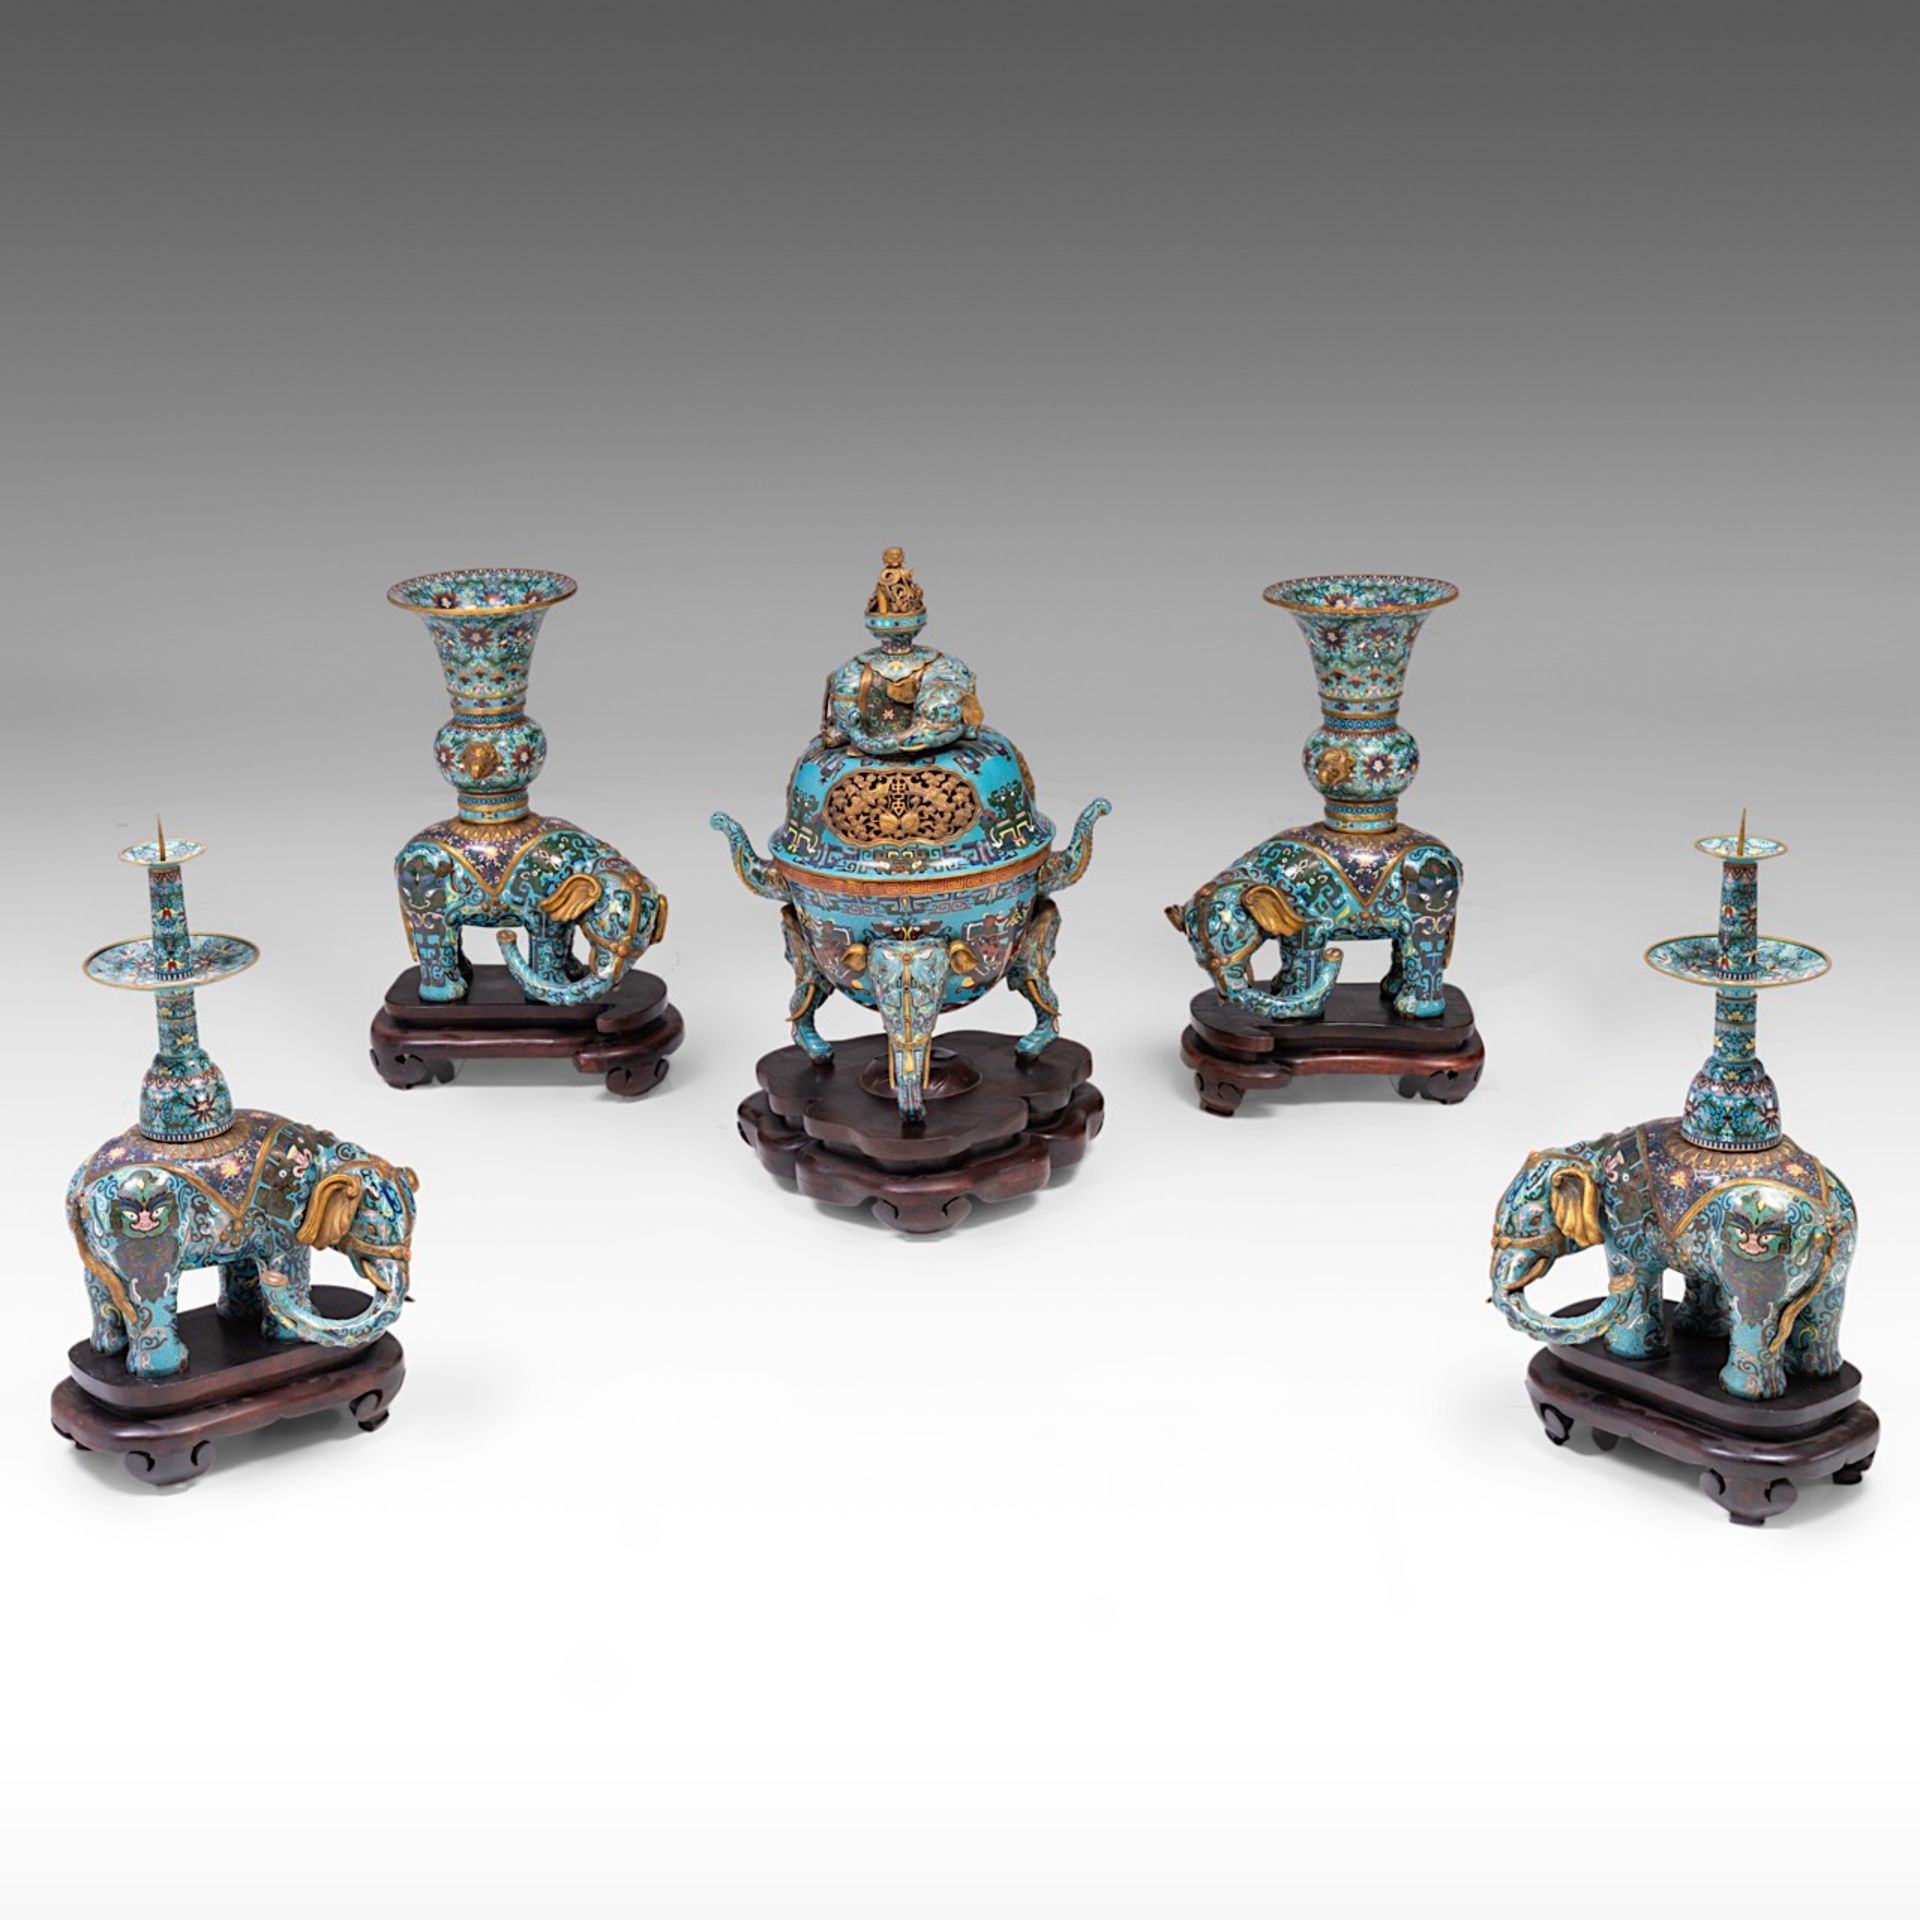 A Chinese five-piece semi-precious stone inlaid cloisonne garniture, late Qing/20thC, tallest H 58 -